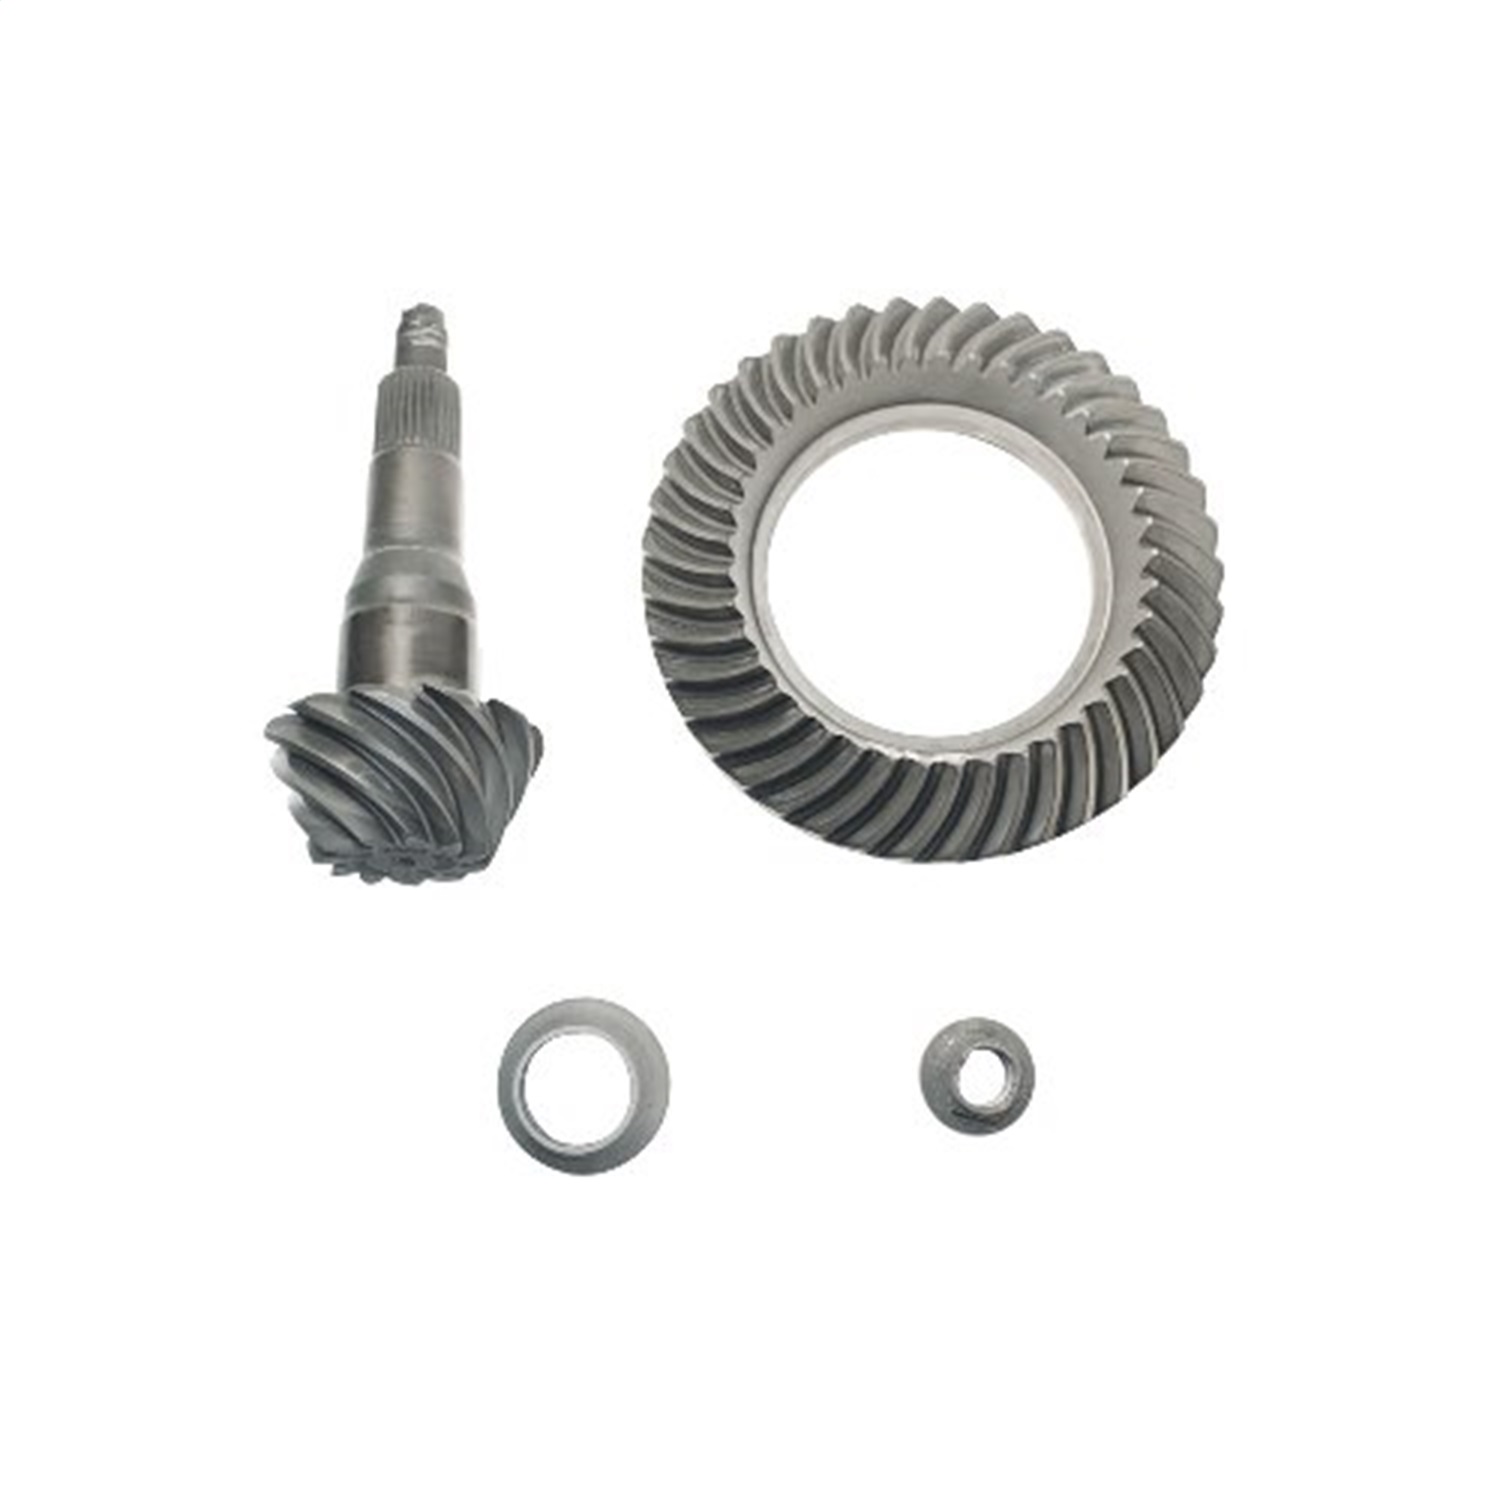 Ford Racing Ford Racing M-4209-88355A 8.8 in. Ring And Pinion Installation Kit Fits Mustang